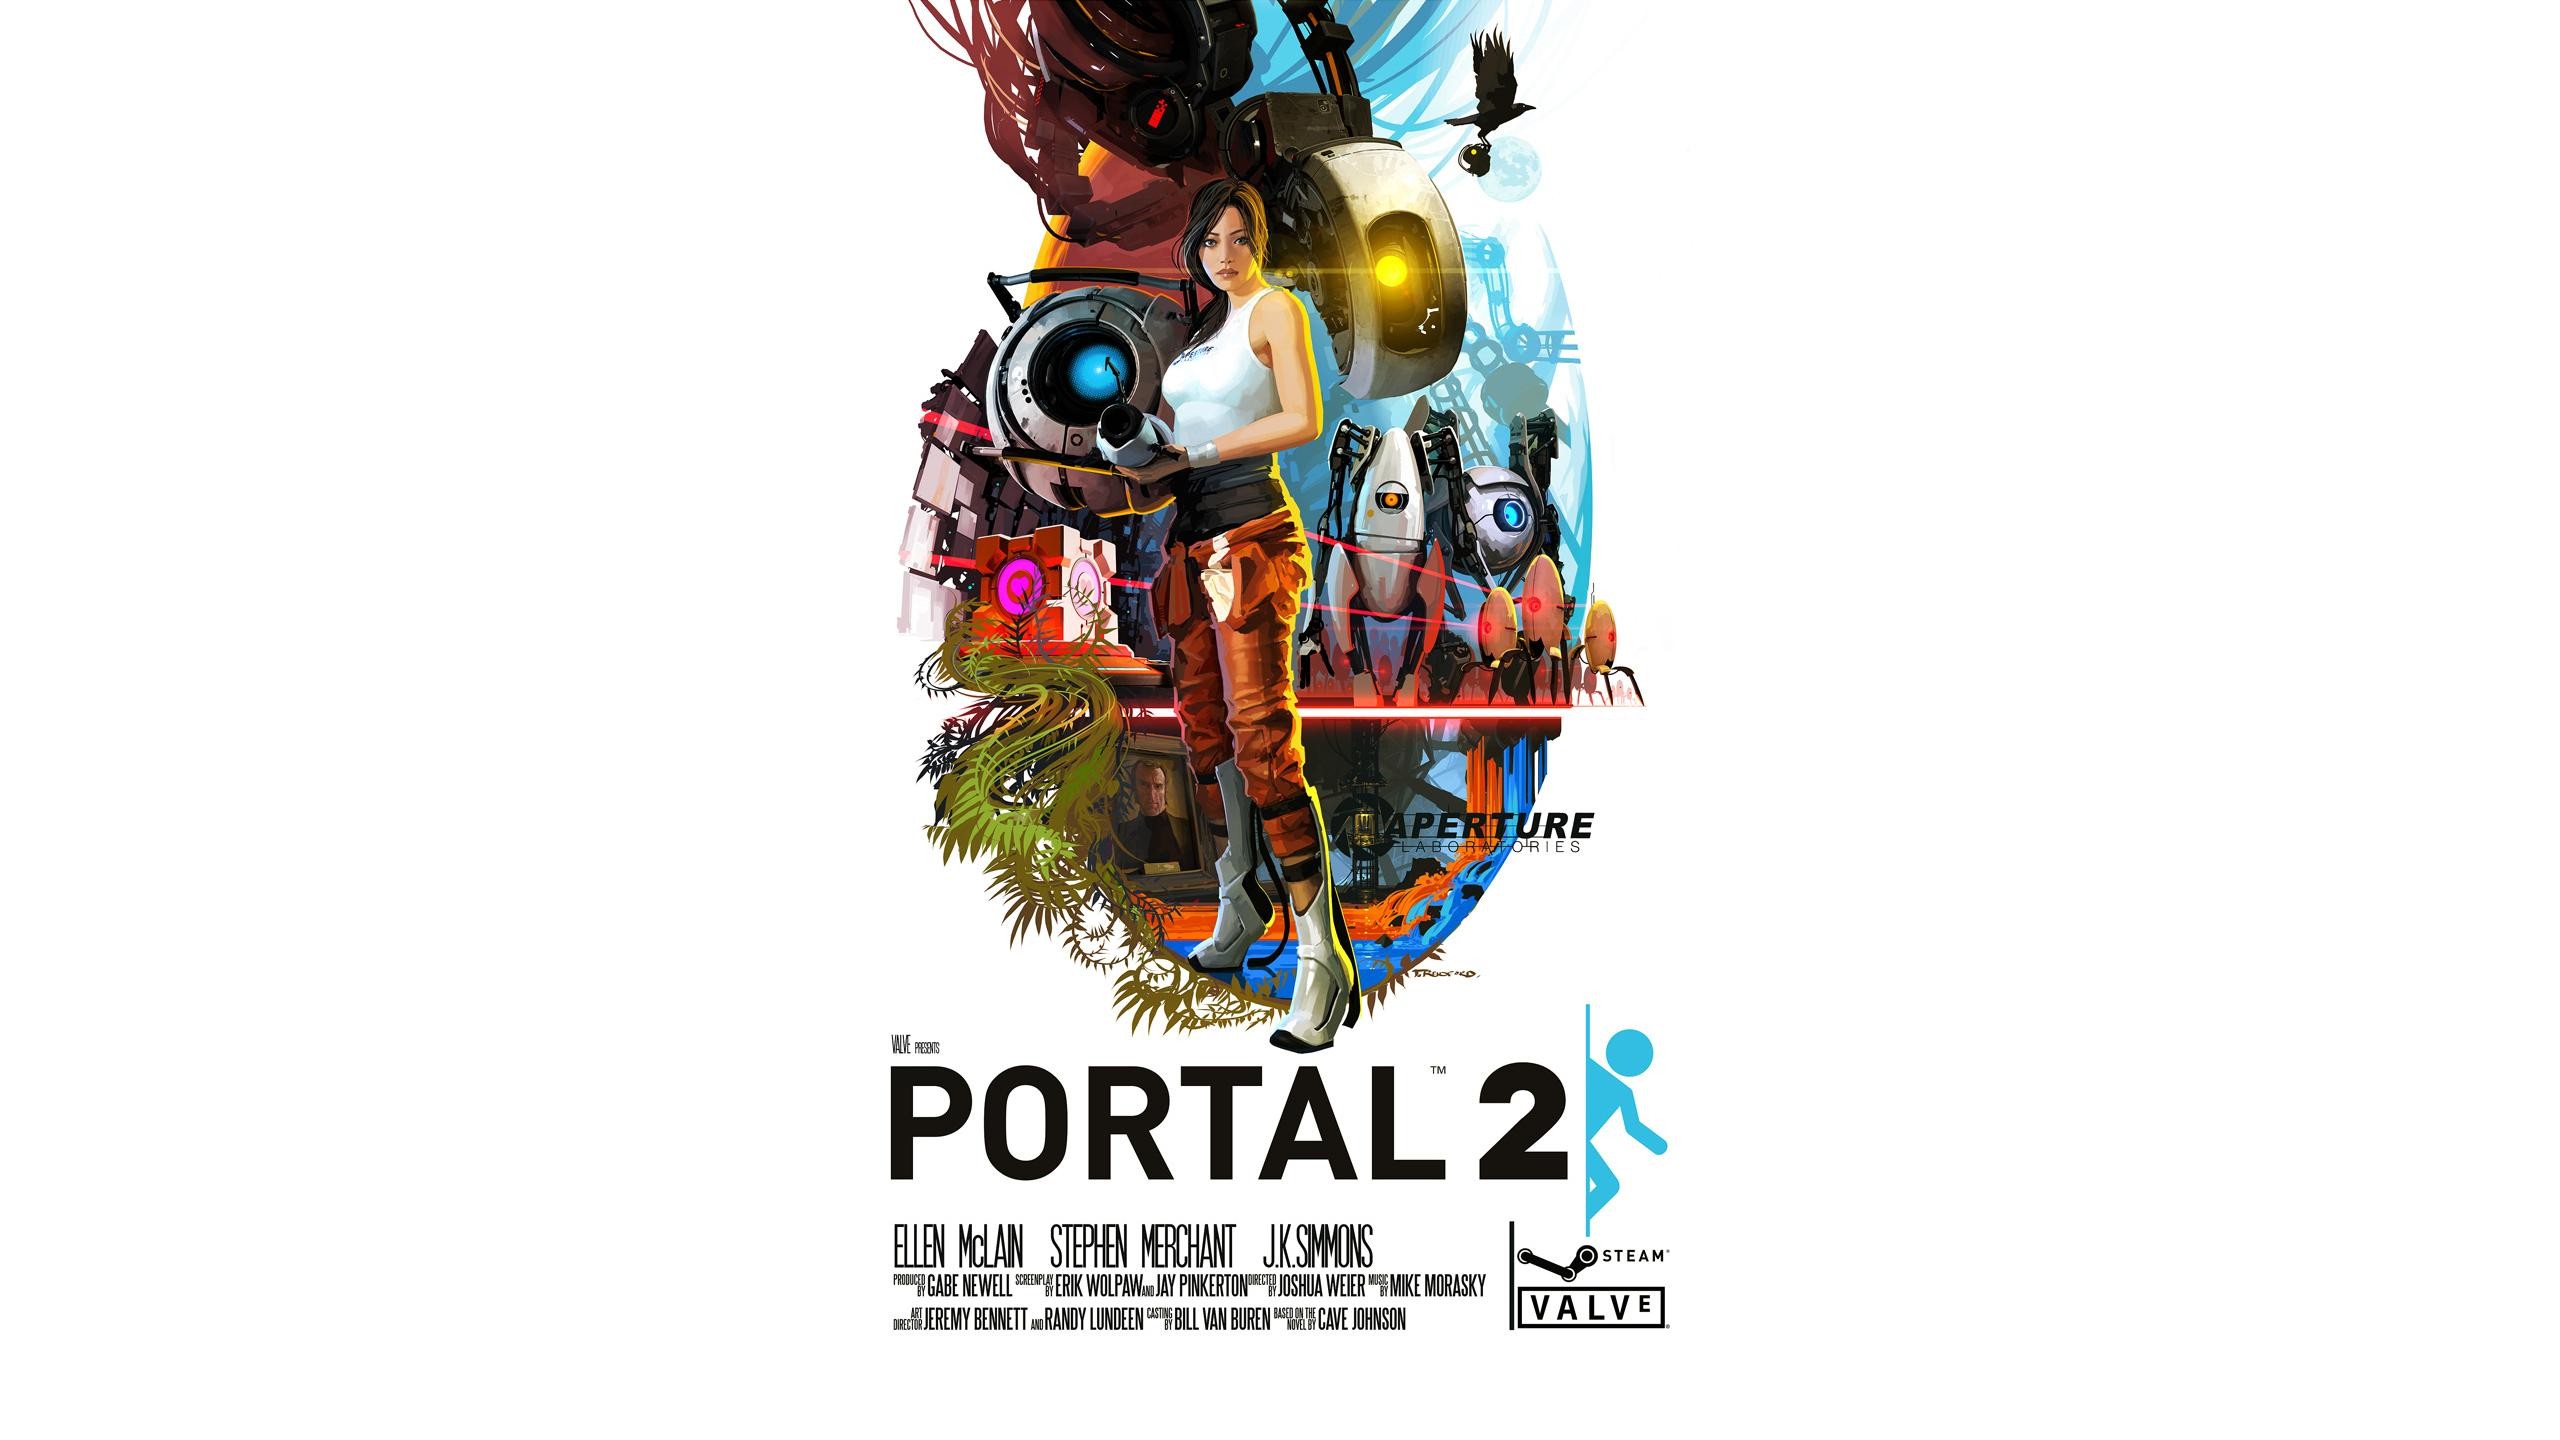 2560x1080 Portal Portal 2 Game 2560x1080 Resolution Wallpaper Hd Games 4k Wallpapers Images Photos And Background Wallpapers Den